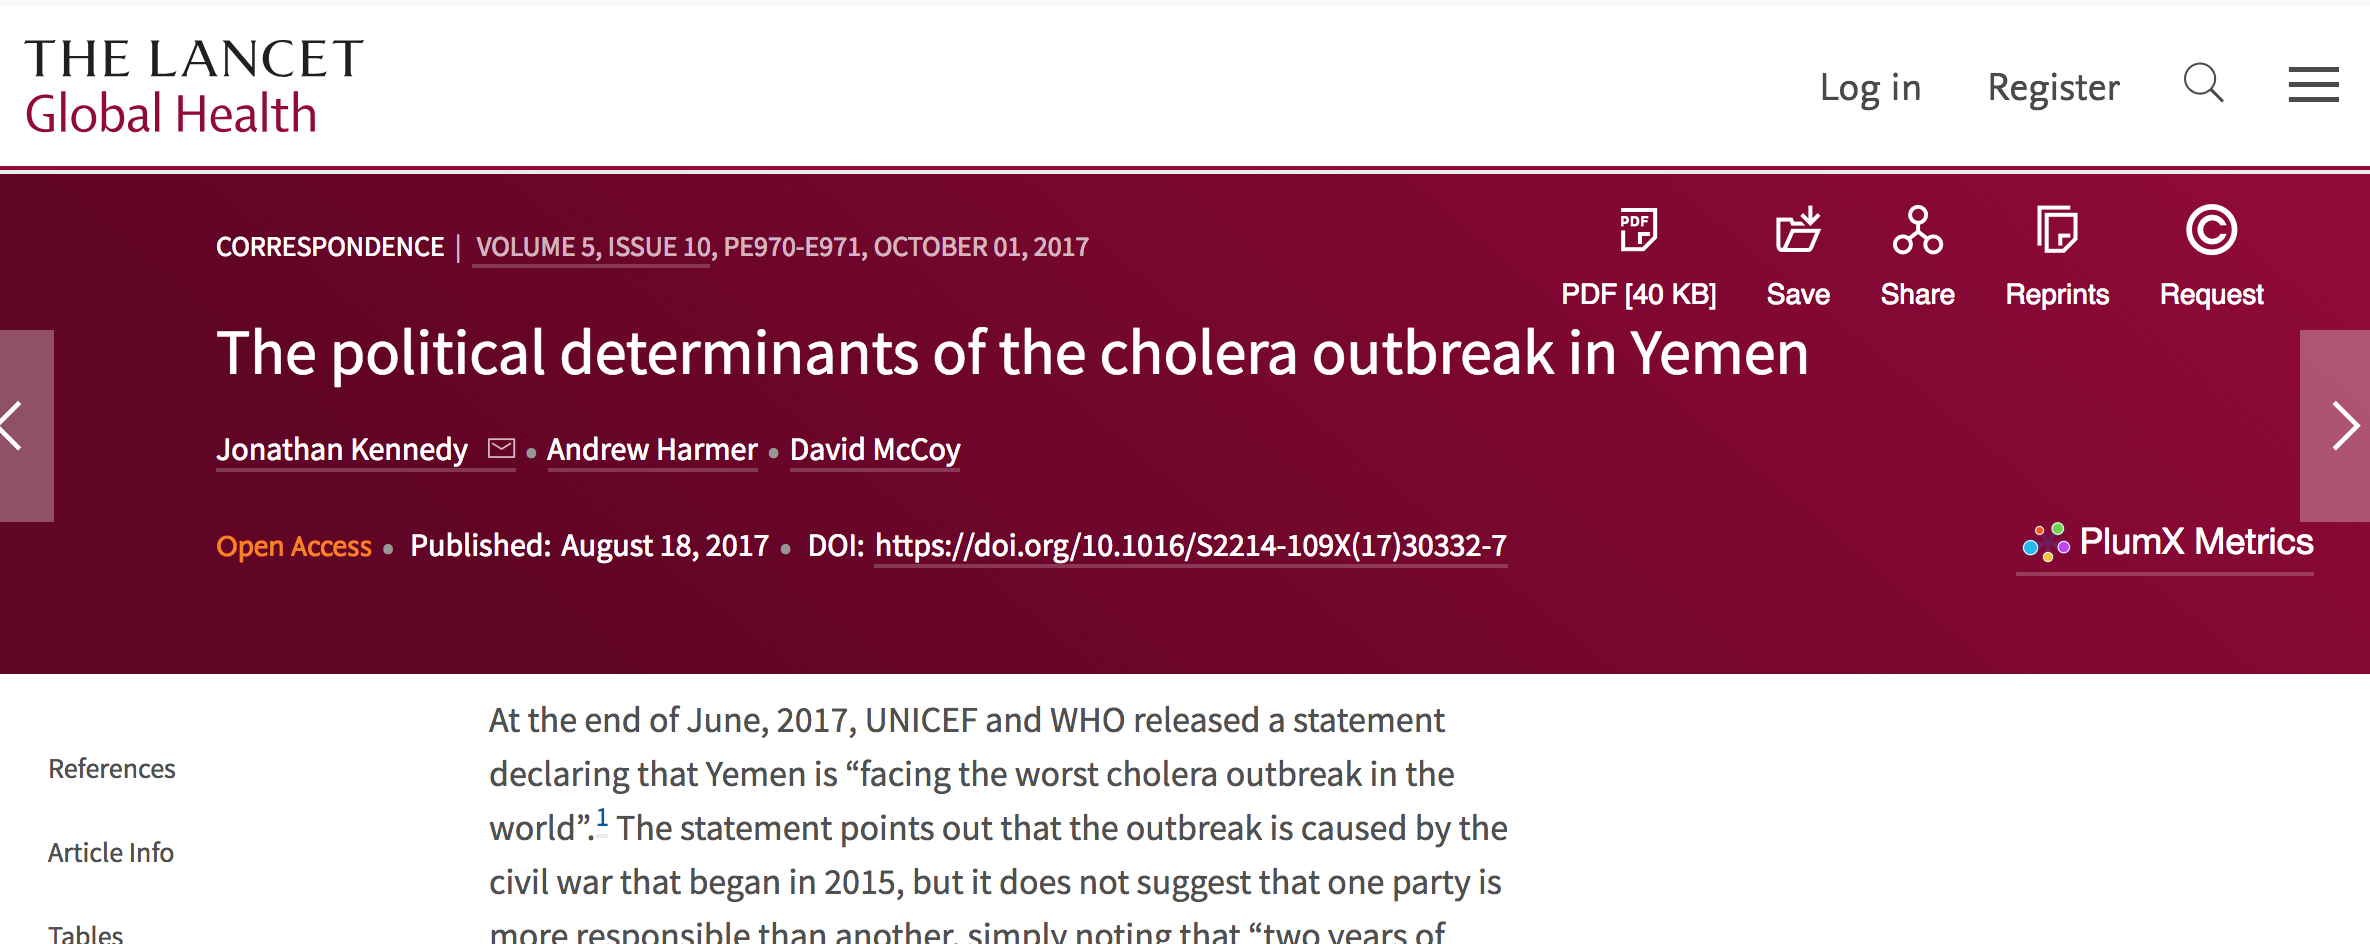 The political determinants of the cholera outbreak in Yemen – The Lancet